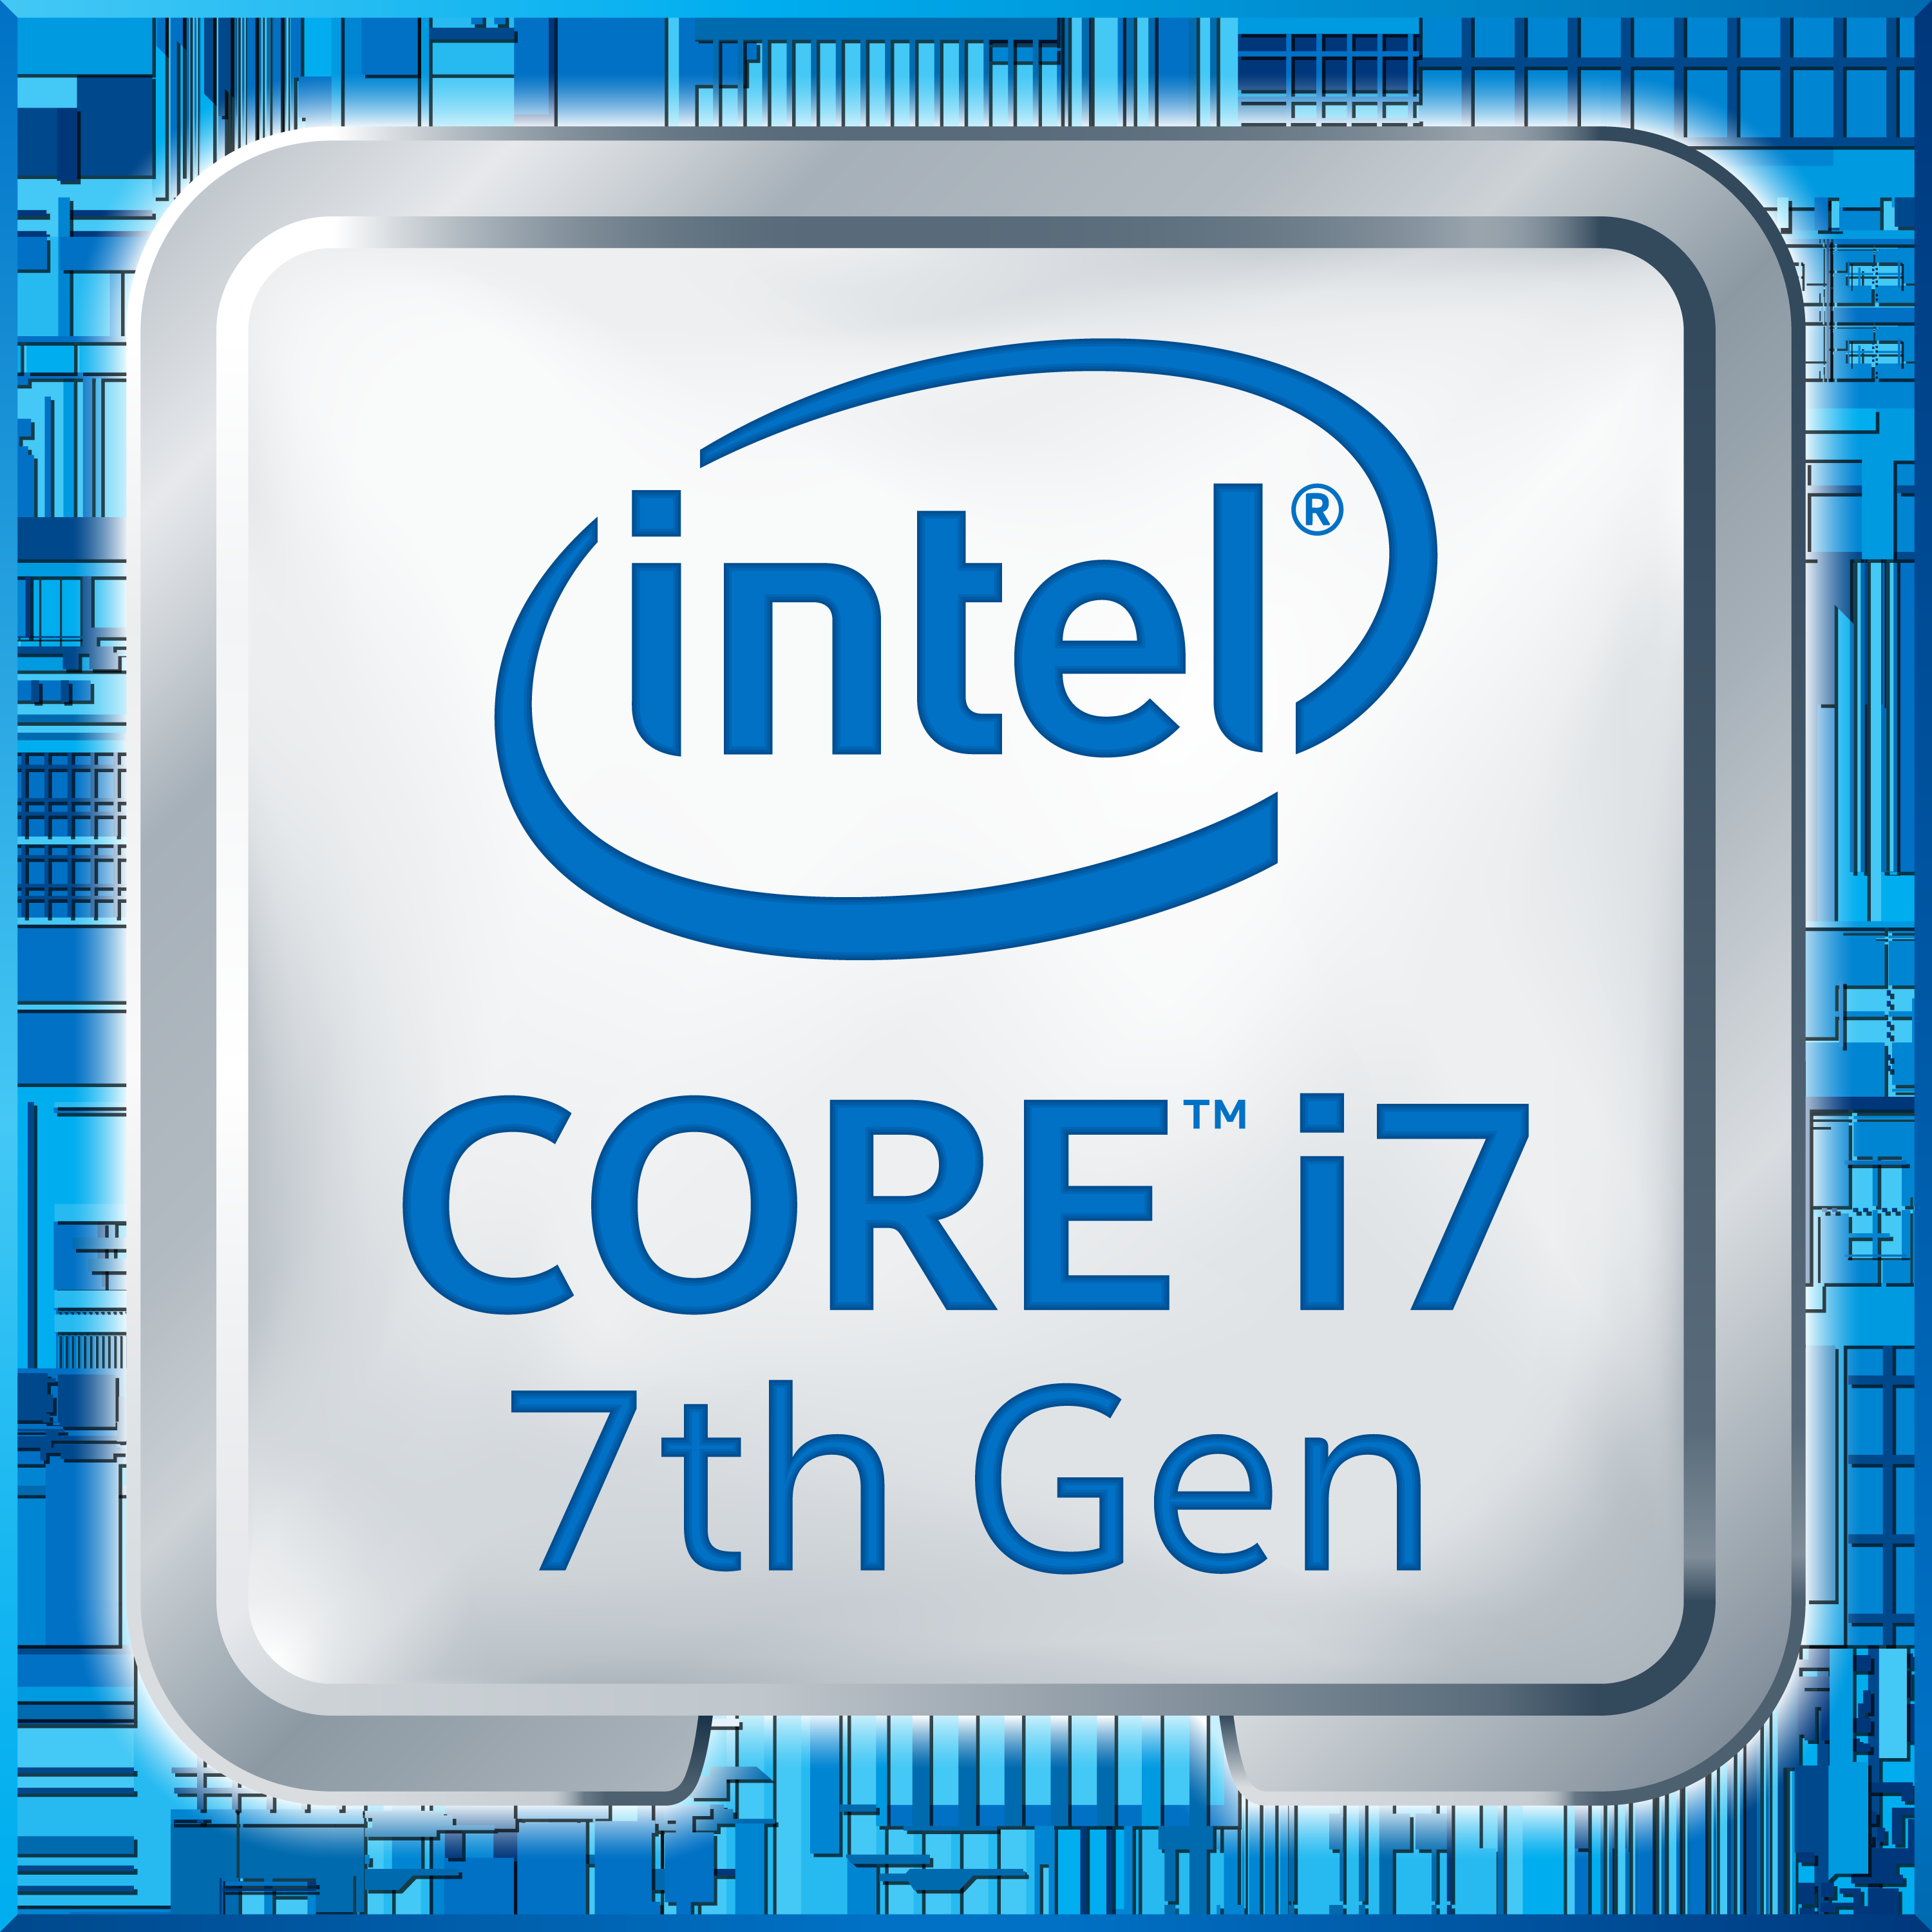 Intel's 7th Generation Core i7 chip code-named Kaby Lake will be in 2-in-1s.